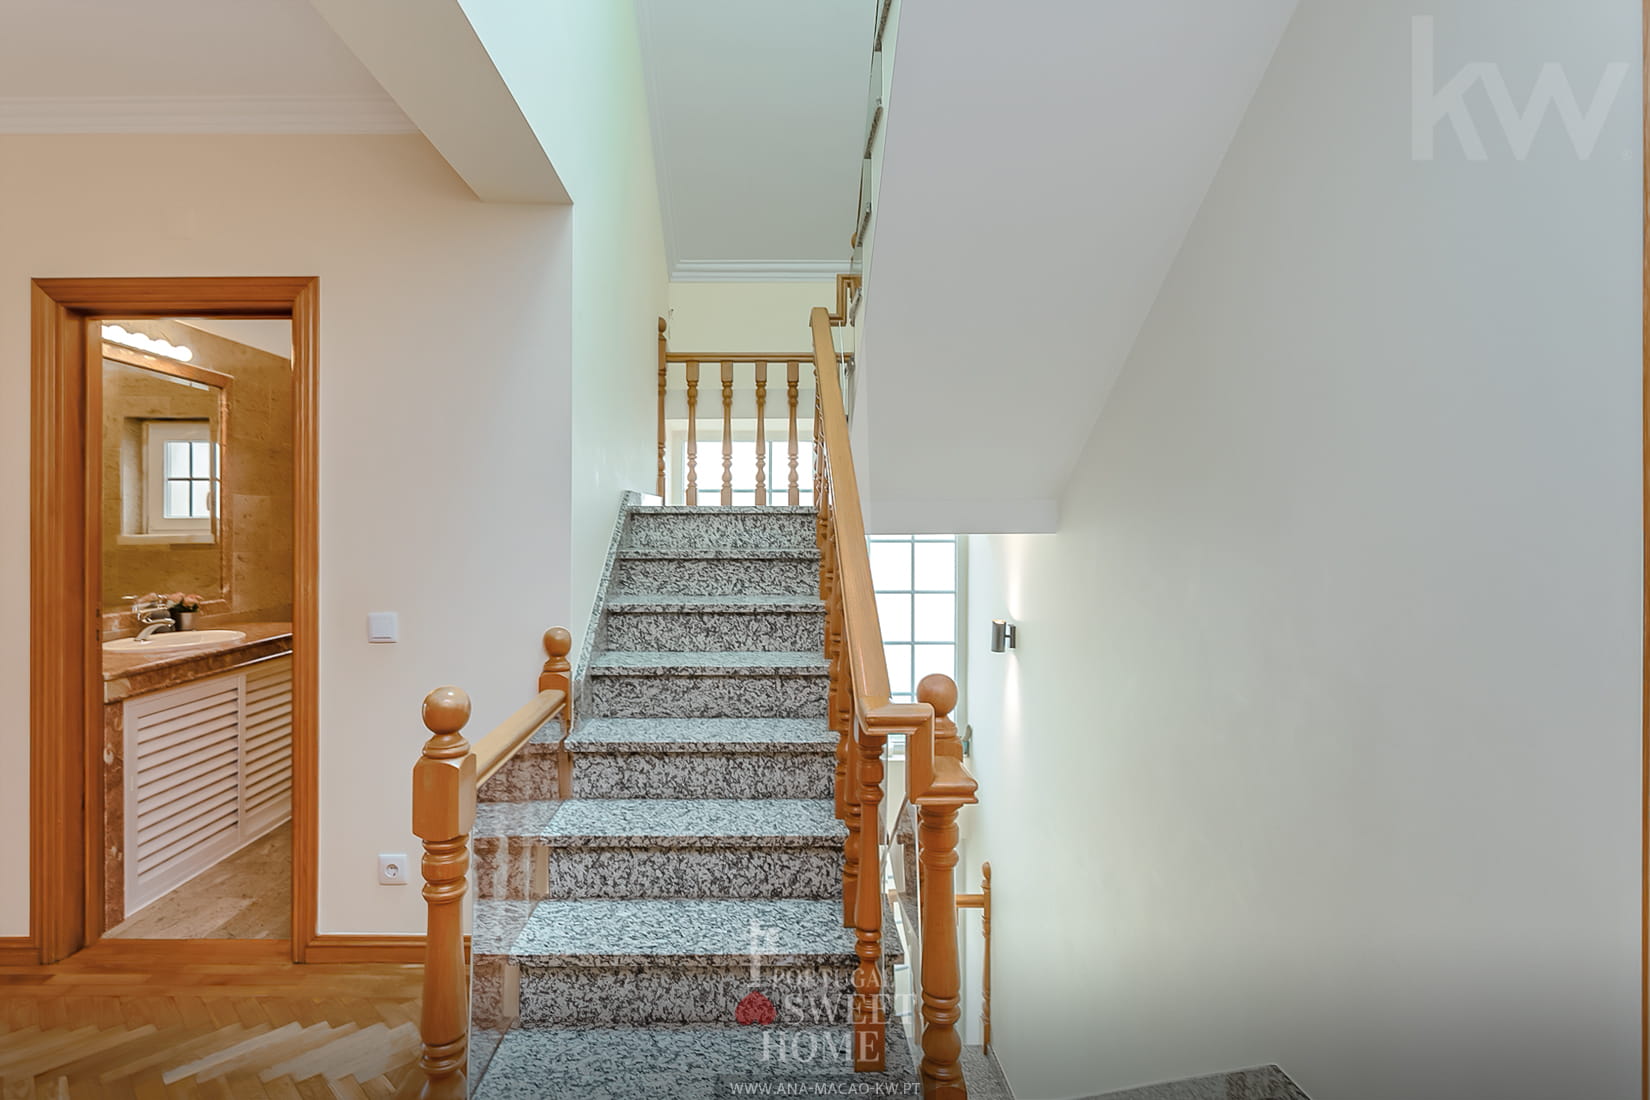 Attic access stairs